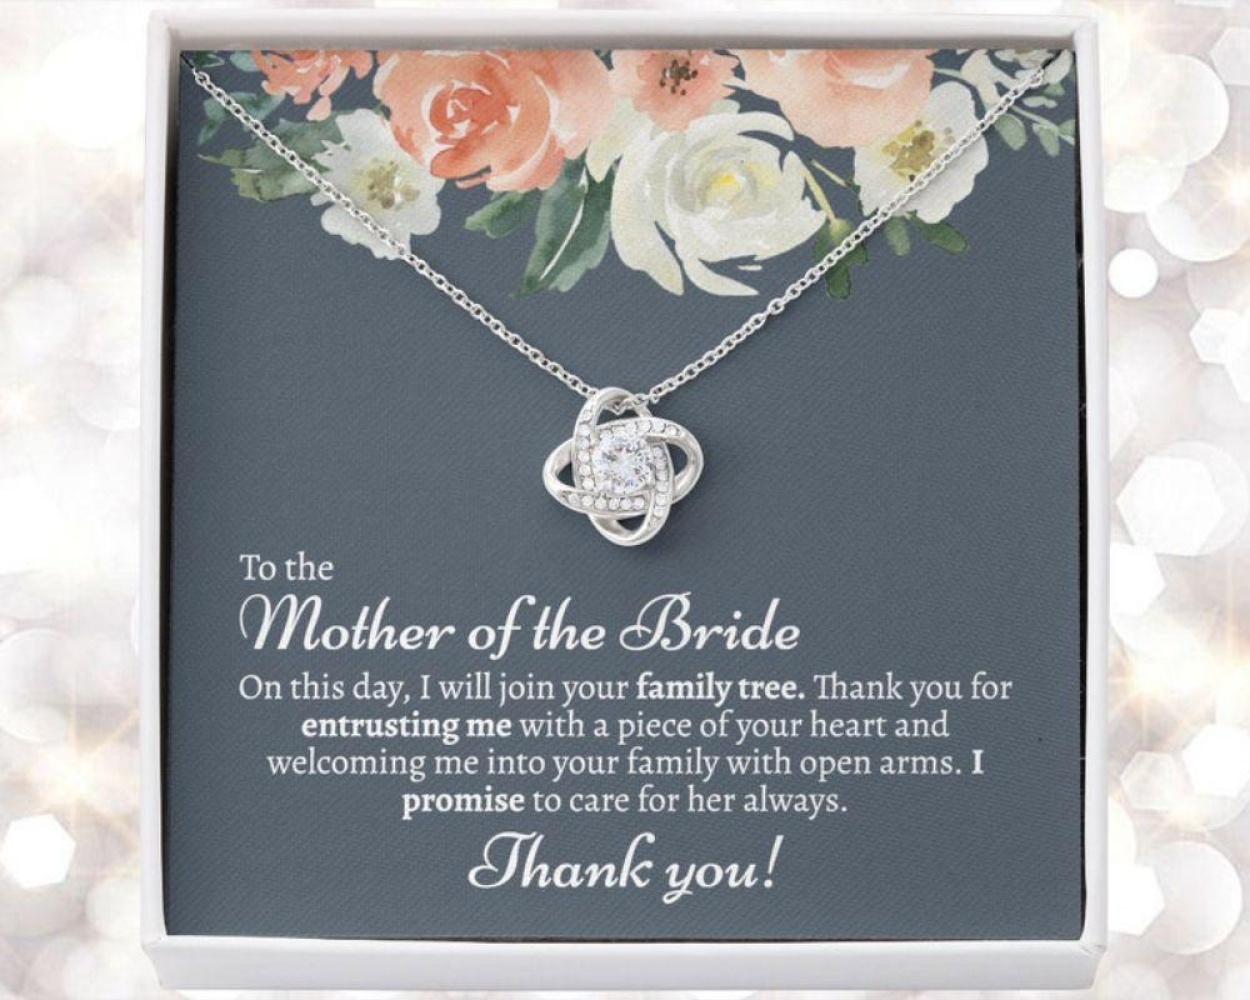 Mom Necklace, Sentimental Mother Of The Bride Gift From Groom, Mother In Law Wedding Gift From Groom, Wedding Gift For Mother In Law